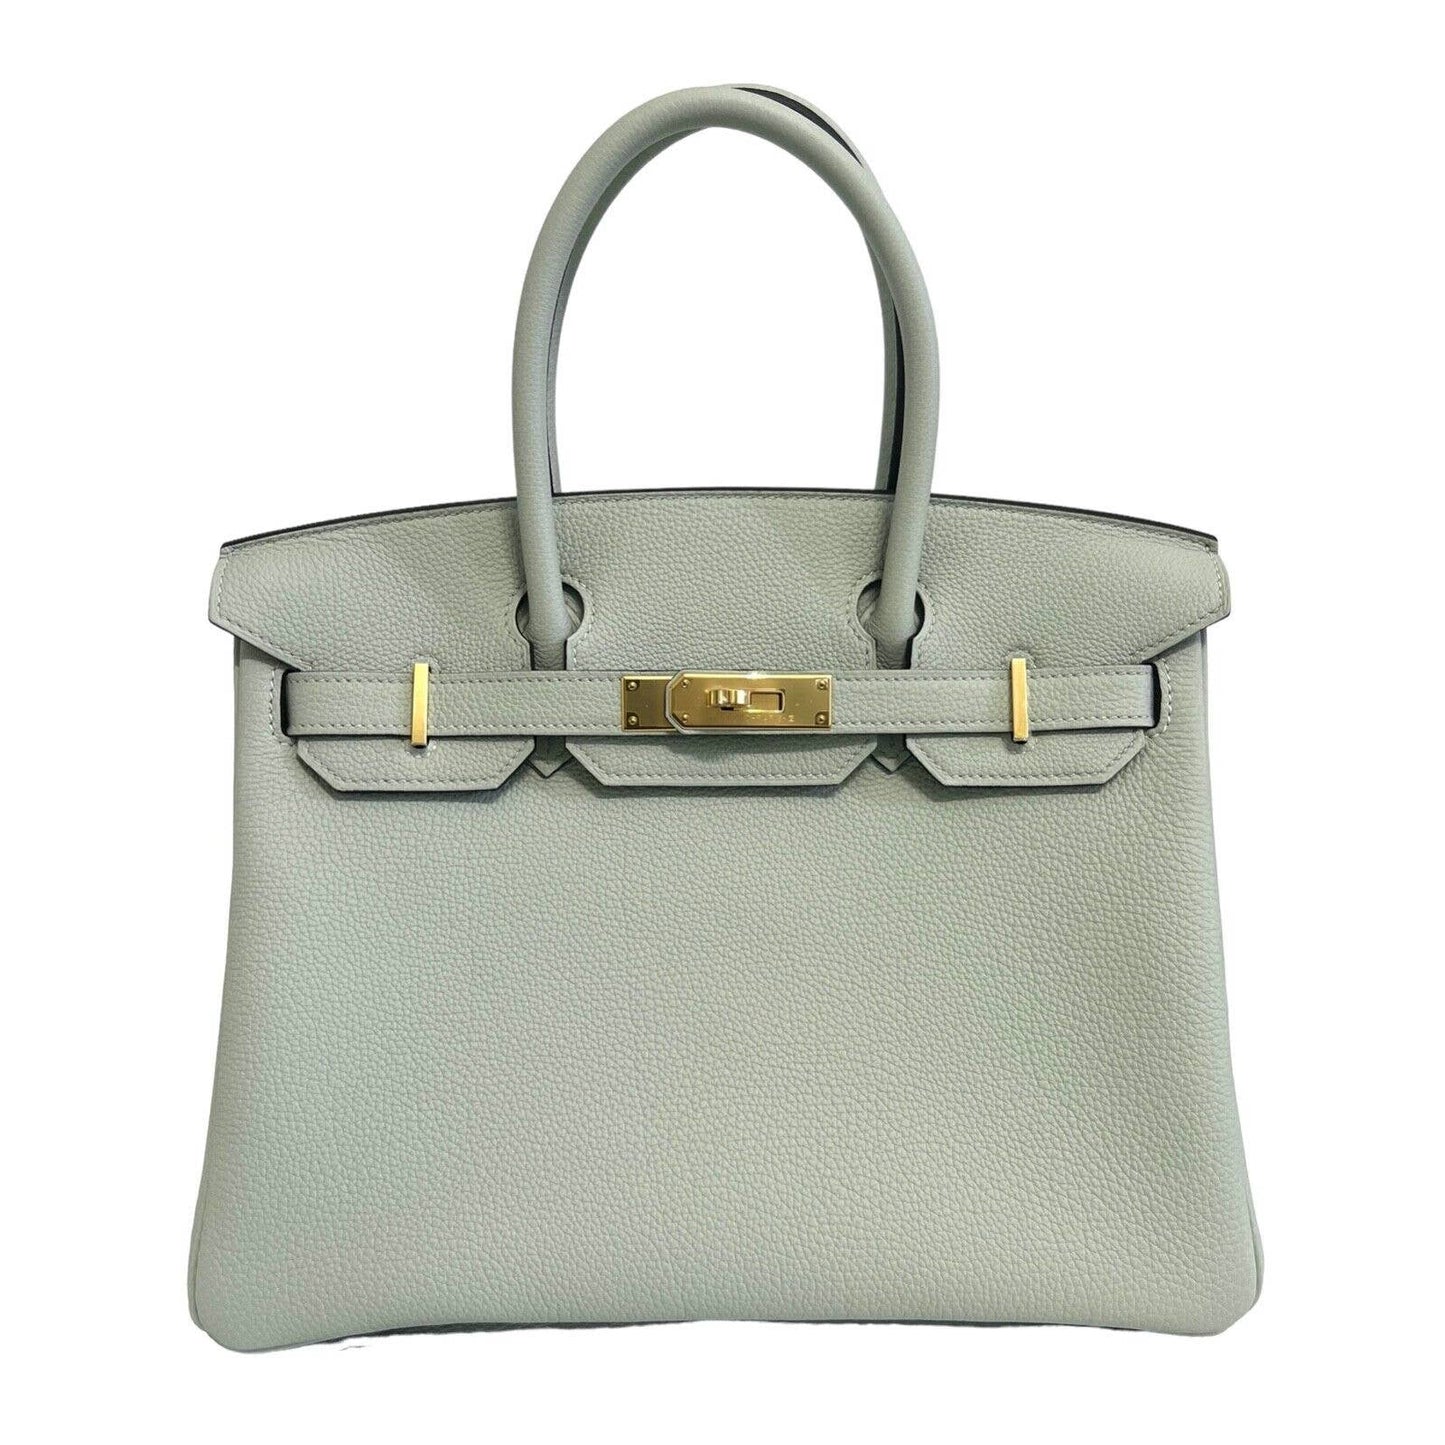 Authentic Hermes Birkin 30 Gris Grey Mouette Gold Hardware Togo Leather